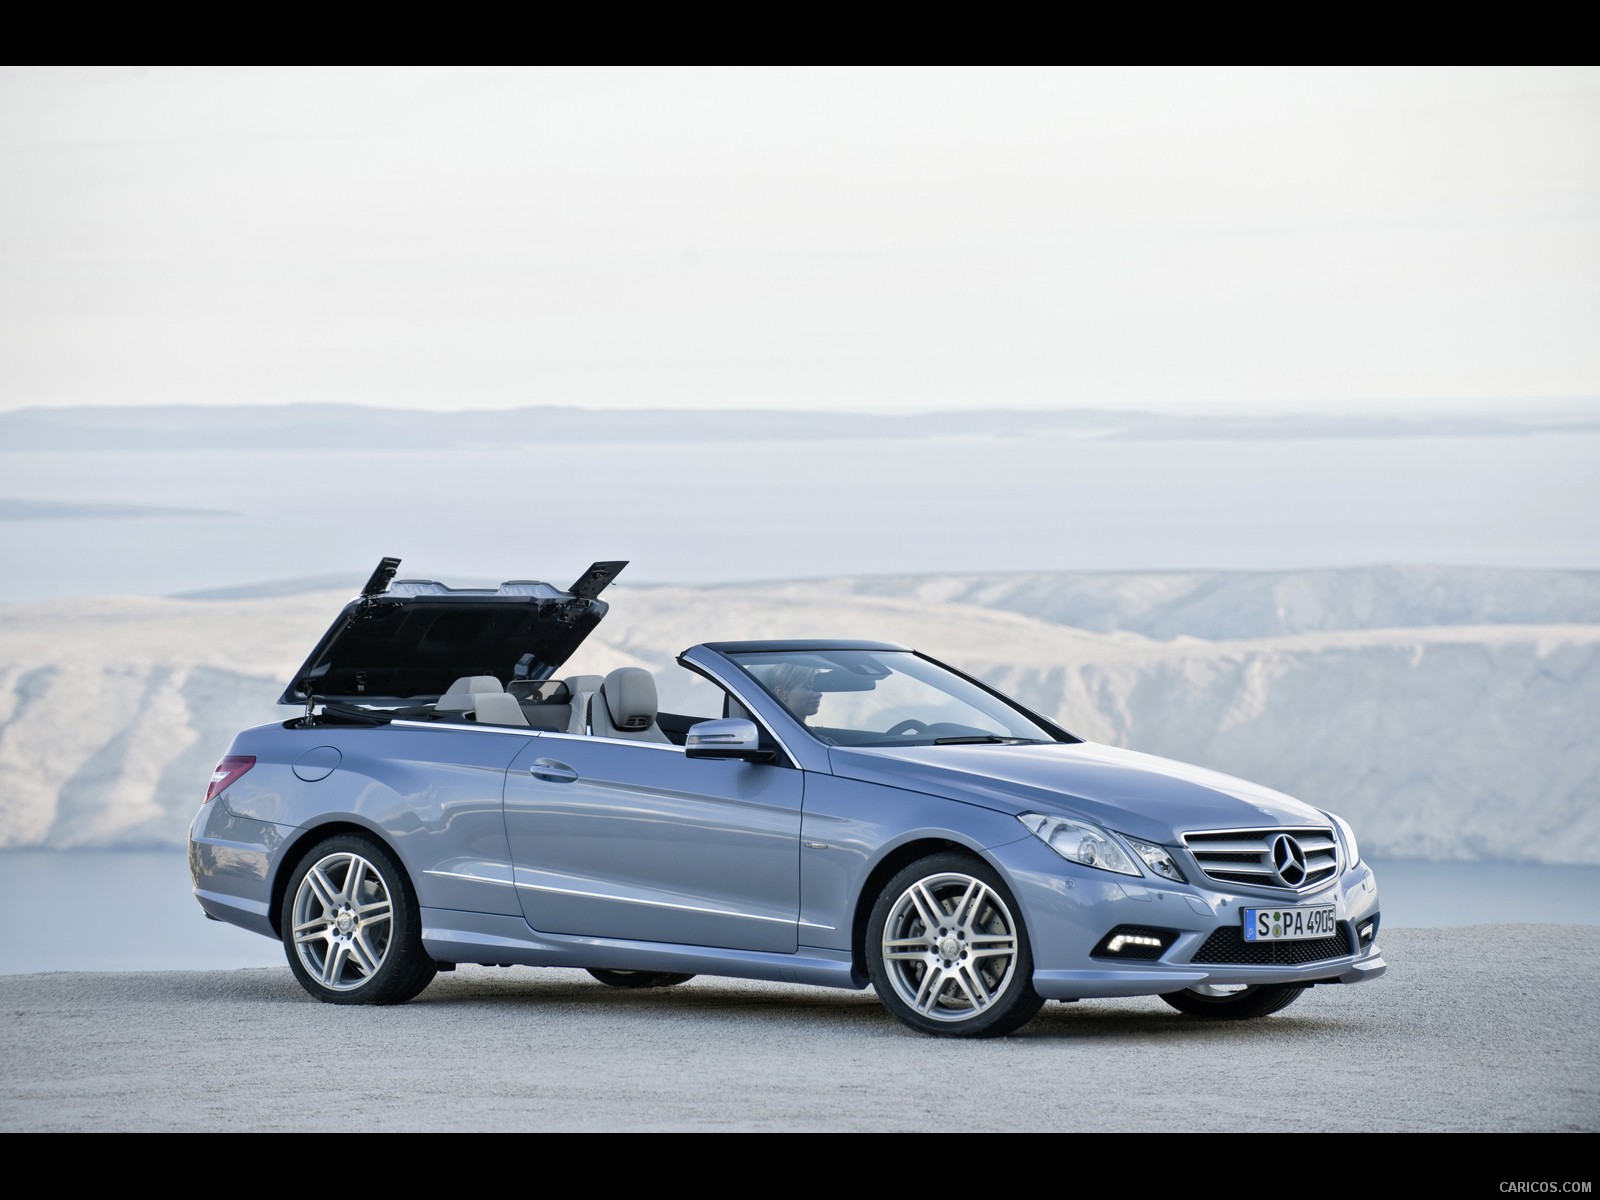 Mercedes-Benz E-Class Cabriolet - Top In Action - , #46 of 165